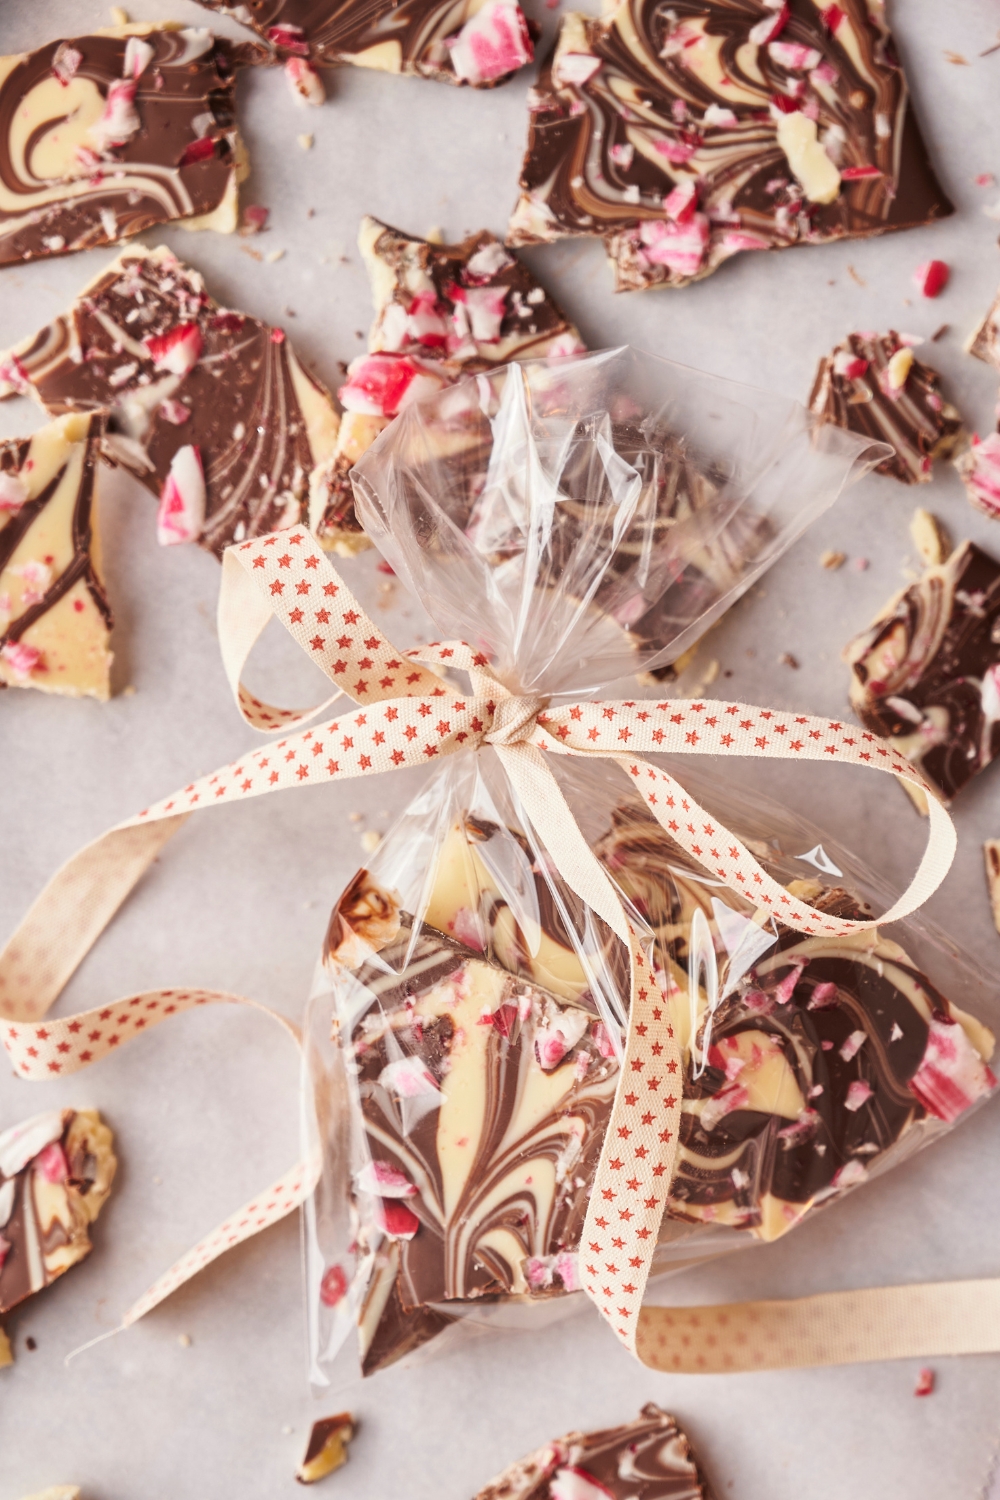 Peppermint bark pieces on parchment paper. A small clear bag of peppermint bark is tied with a ribbon and sitting in the middle of the peppermint bark pieces.